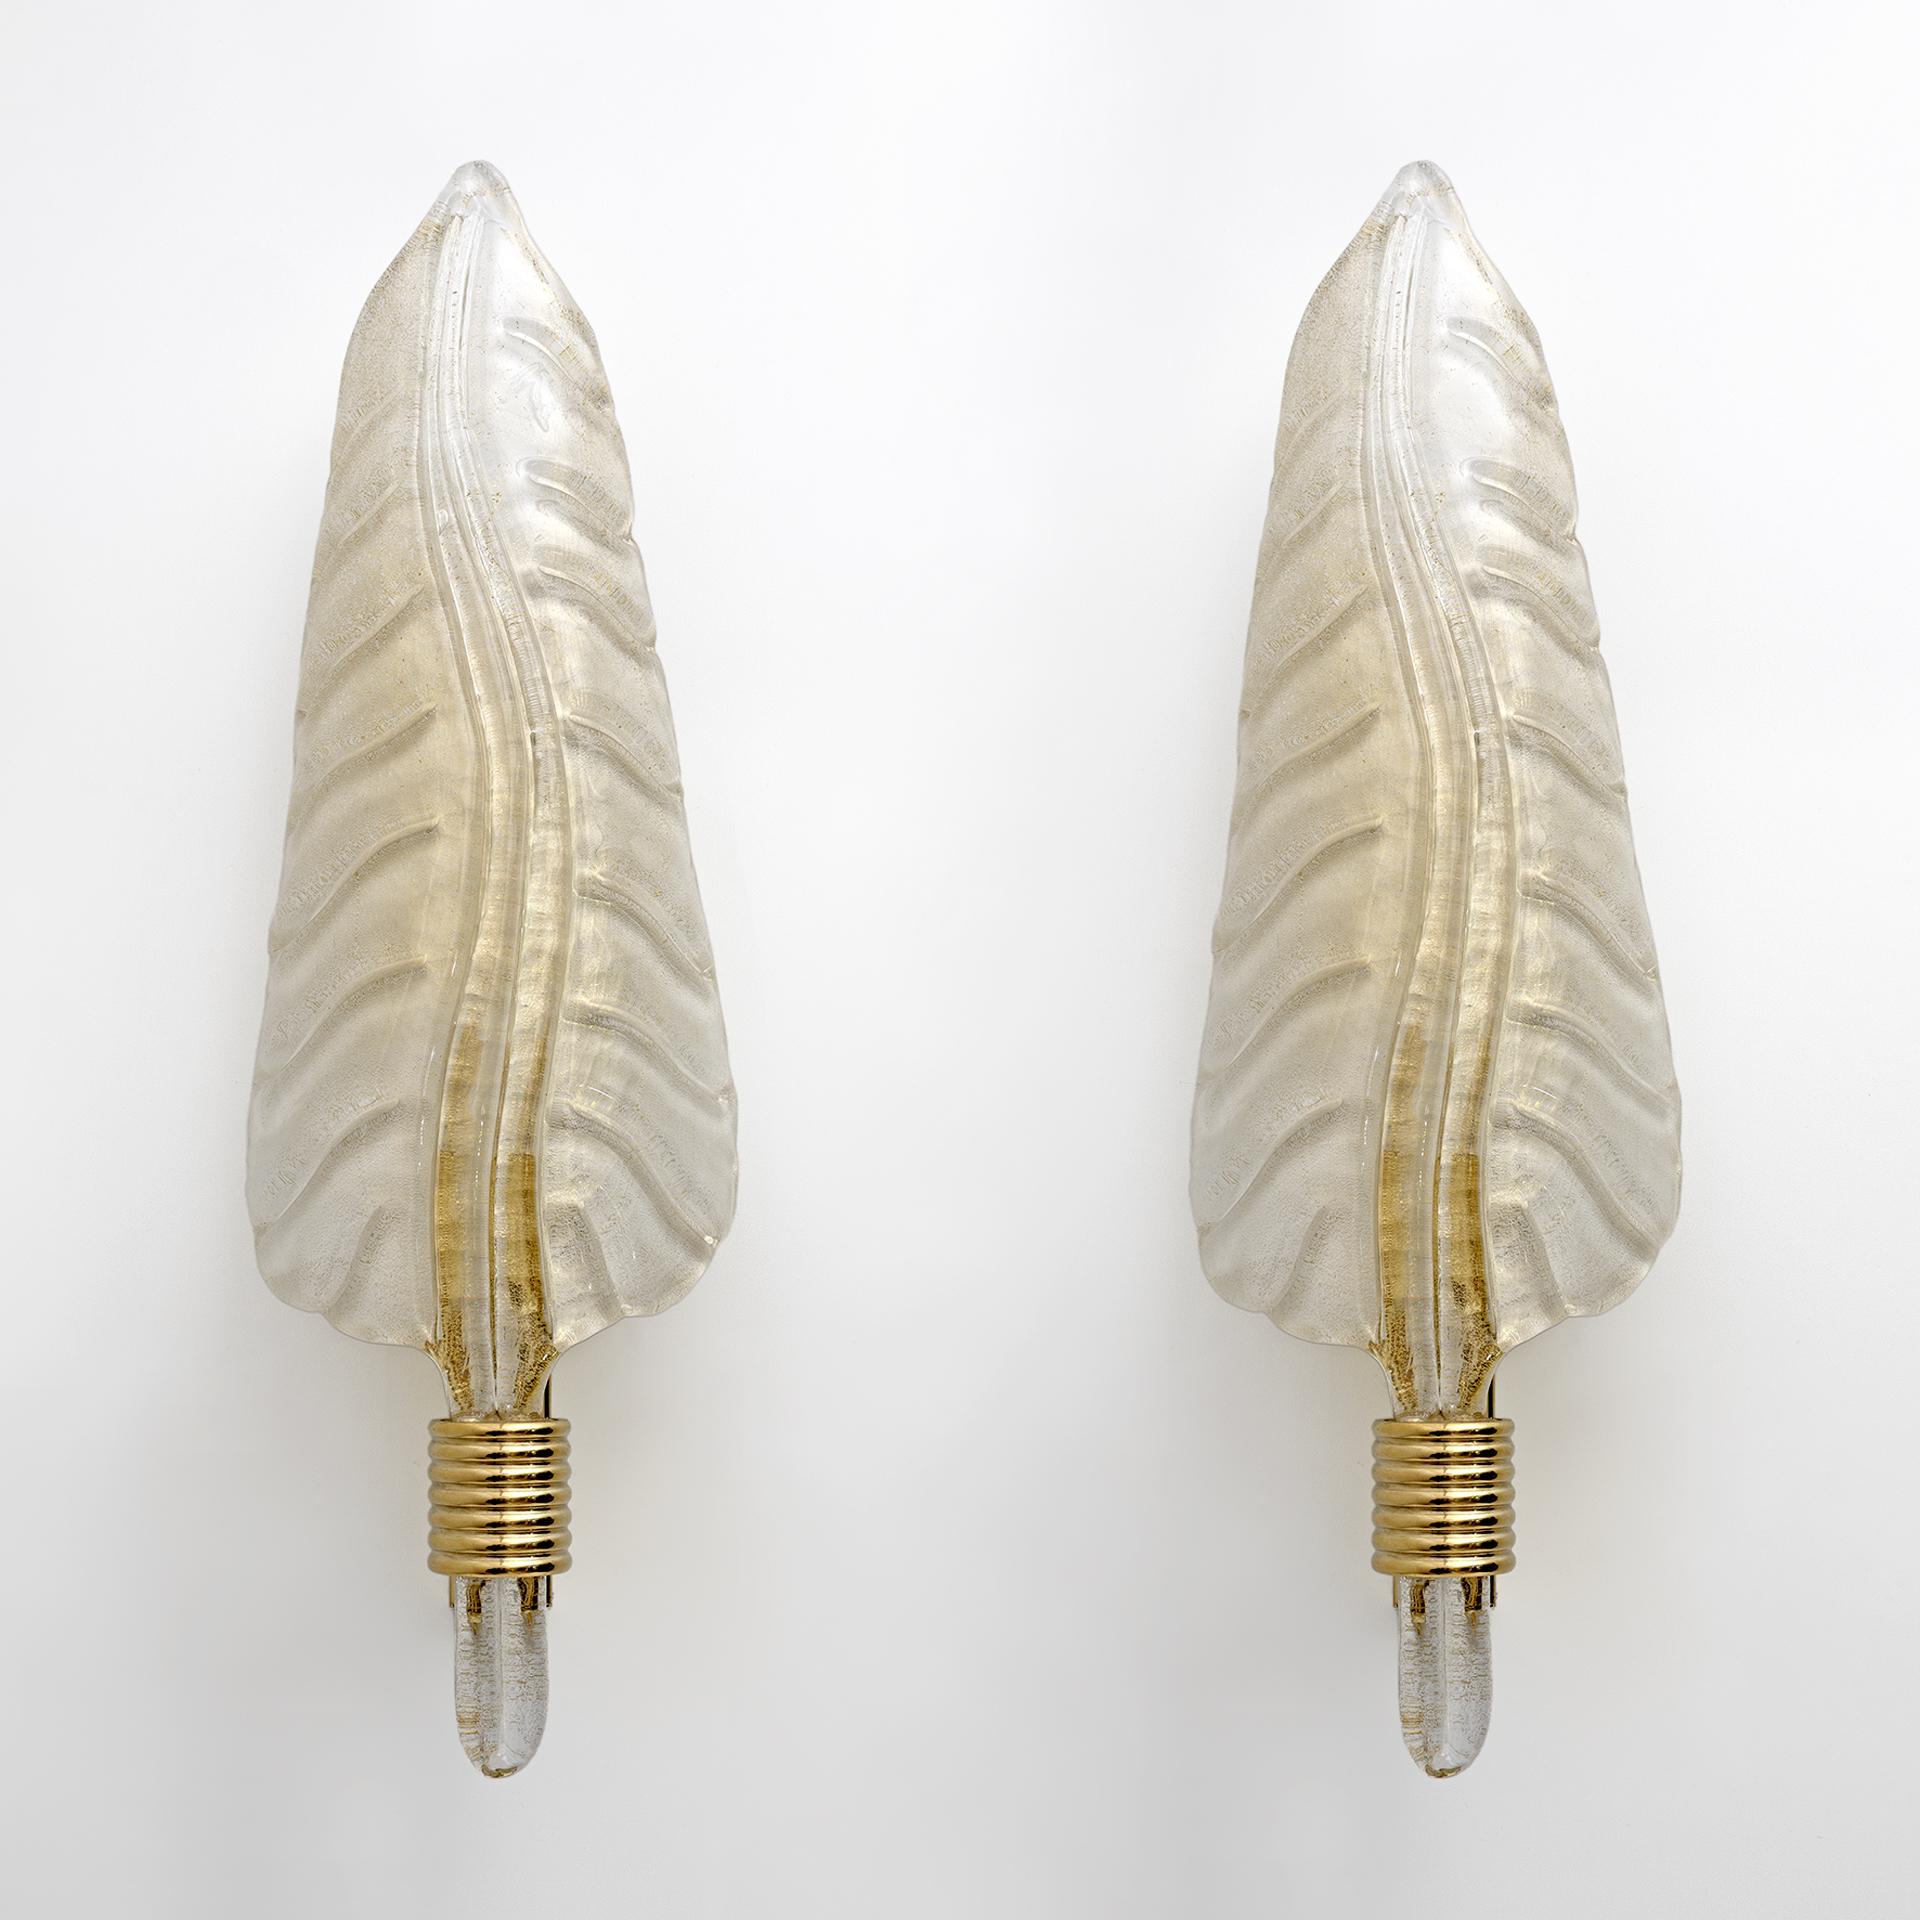 Pair of blown Murano glass appliques in the style of Barovier & Toso, Italy, 1980s. The sconces have brass supports; Murano glass has a light, transparent gold color with inclusions of gold dust. The wall lights have one light each and are equipped